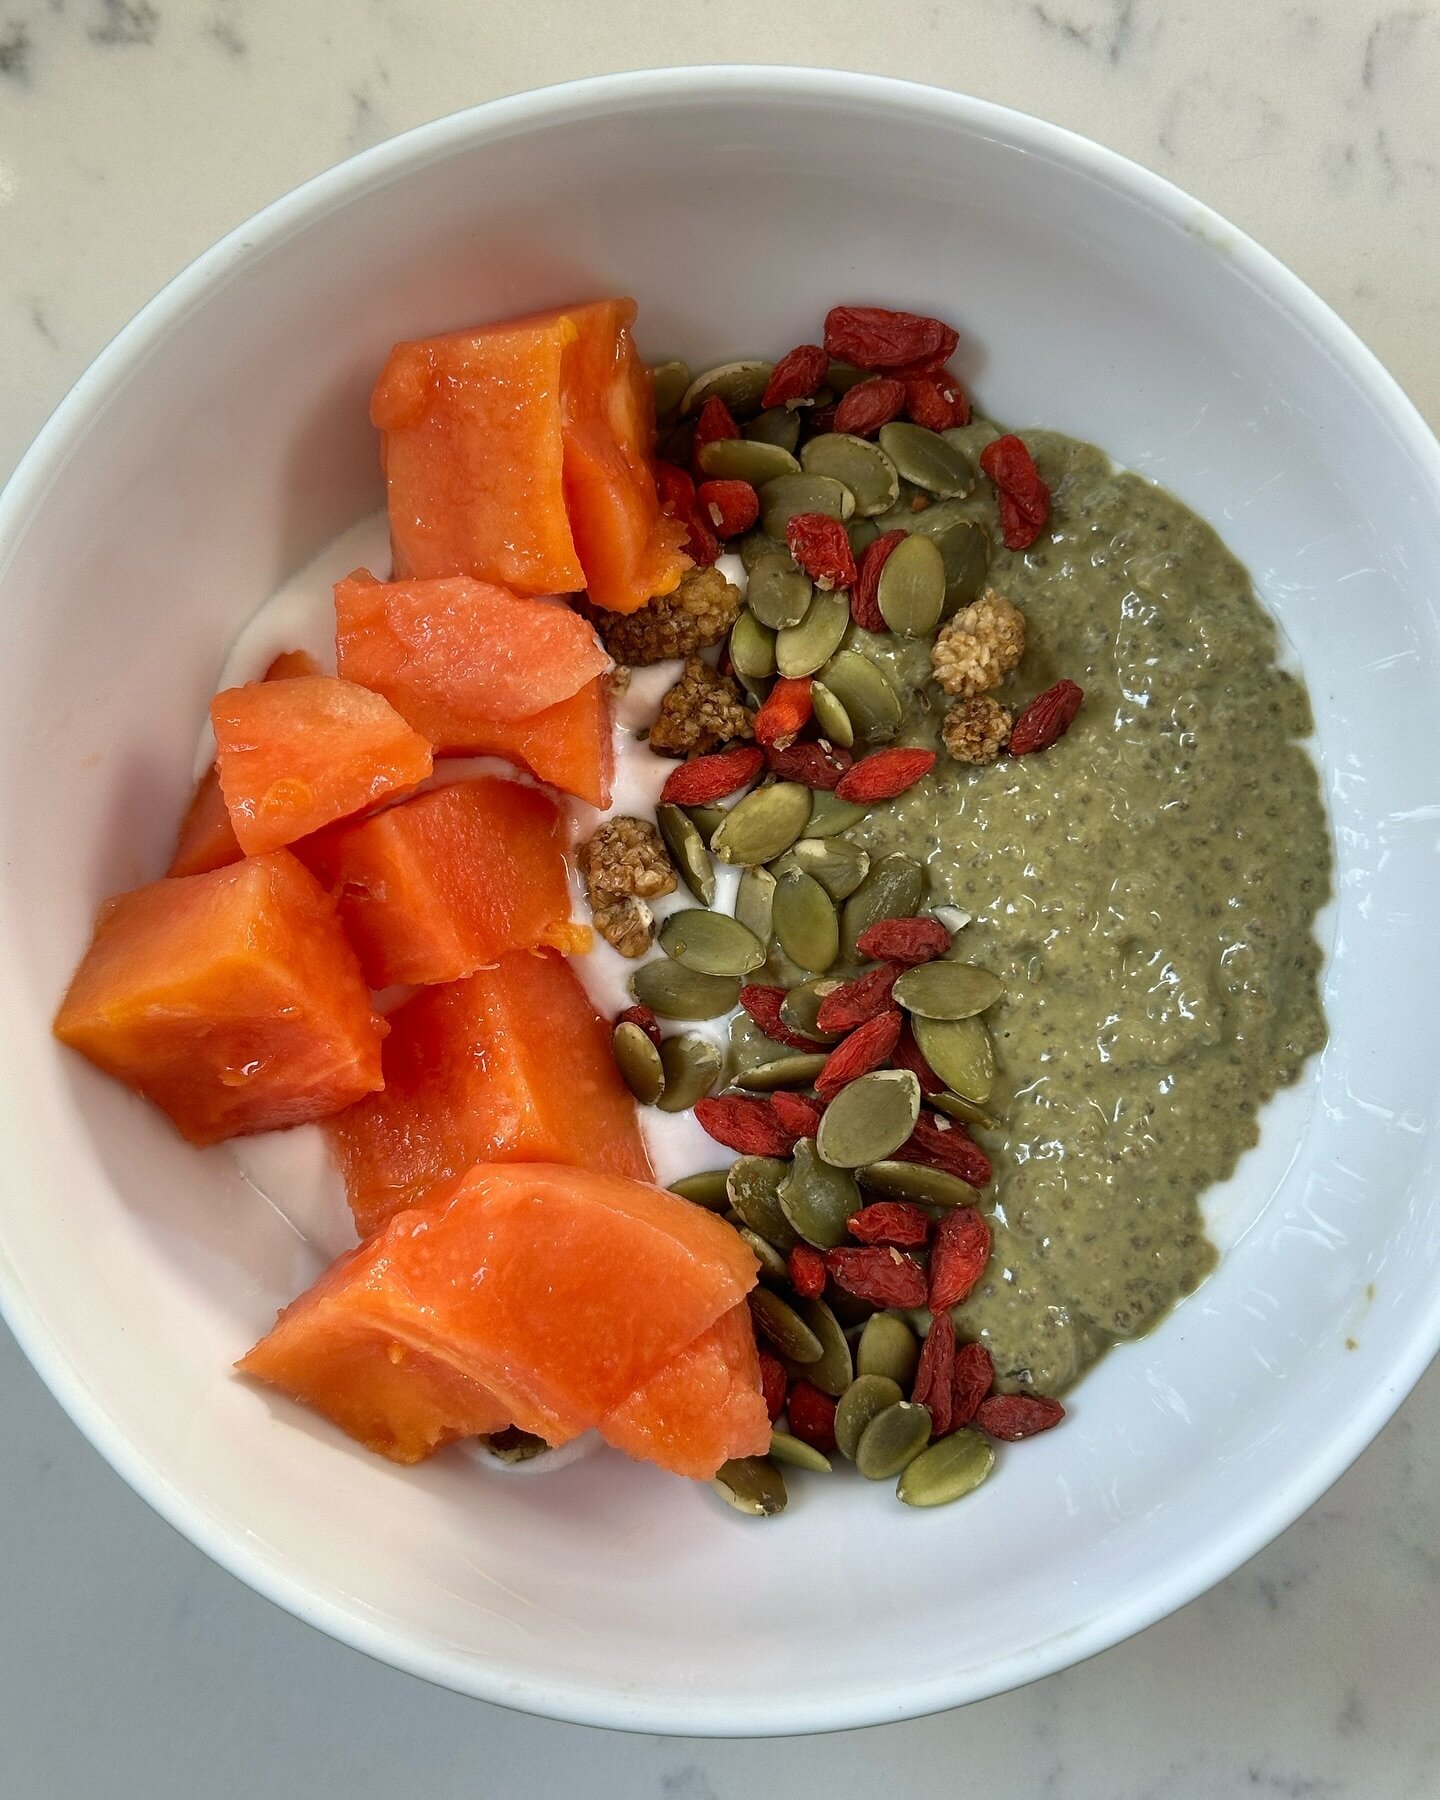 Healthy fats/ protein /digestive enzymes/ fiber ✌🏼Including a combination of healthy fats, proteins, fiber, and fruits like papaya in your diet can work wonders for both your hormones and gut health. Healthy fats, such as those found in avocados, co